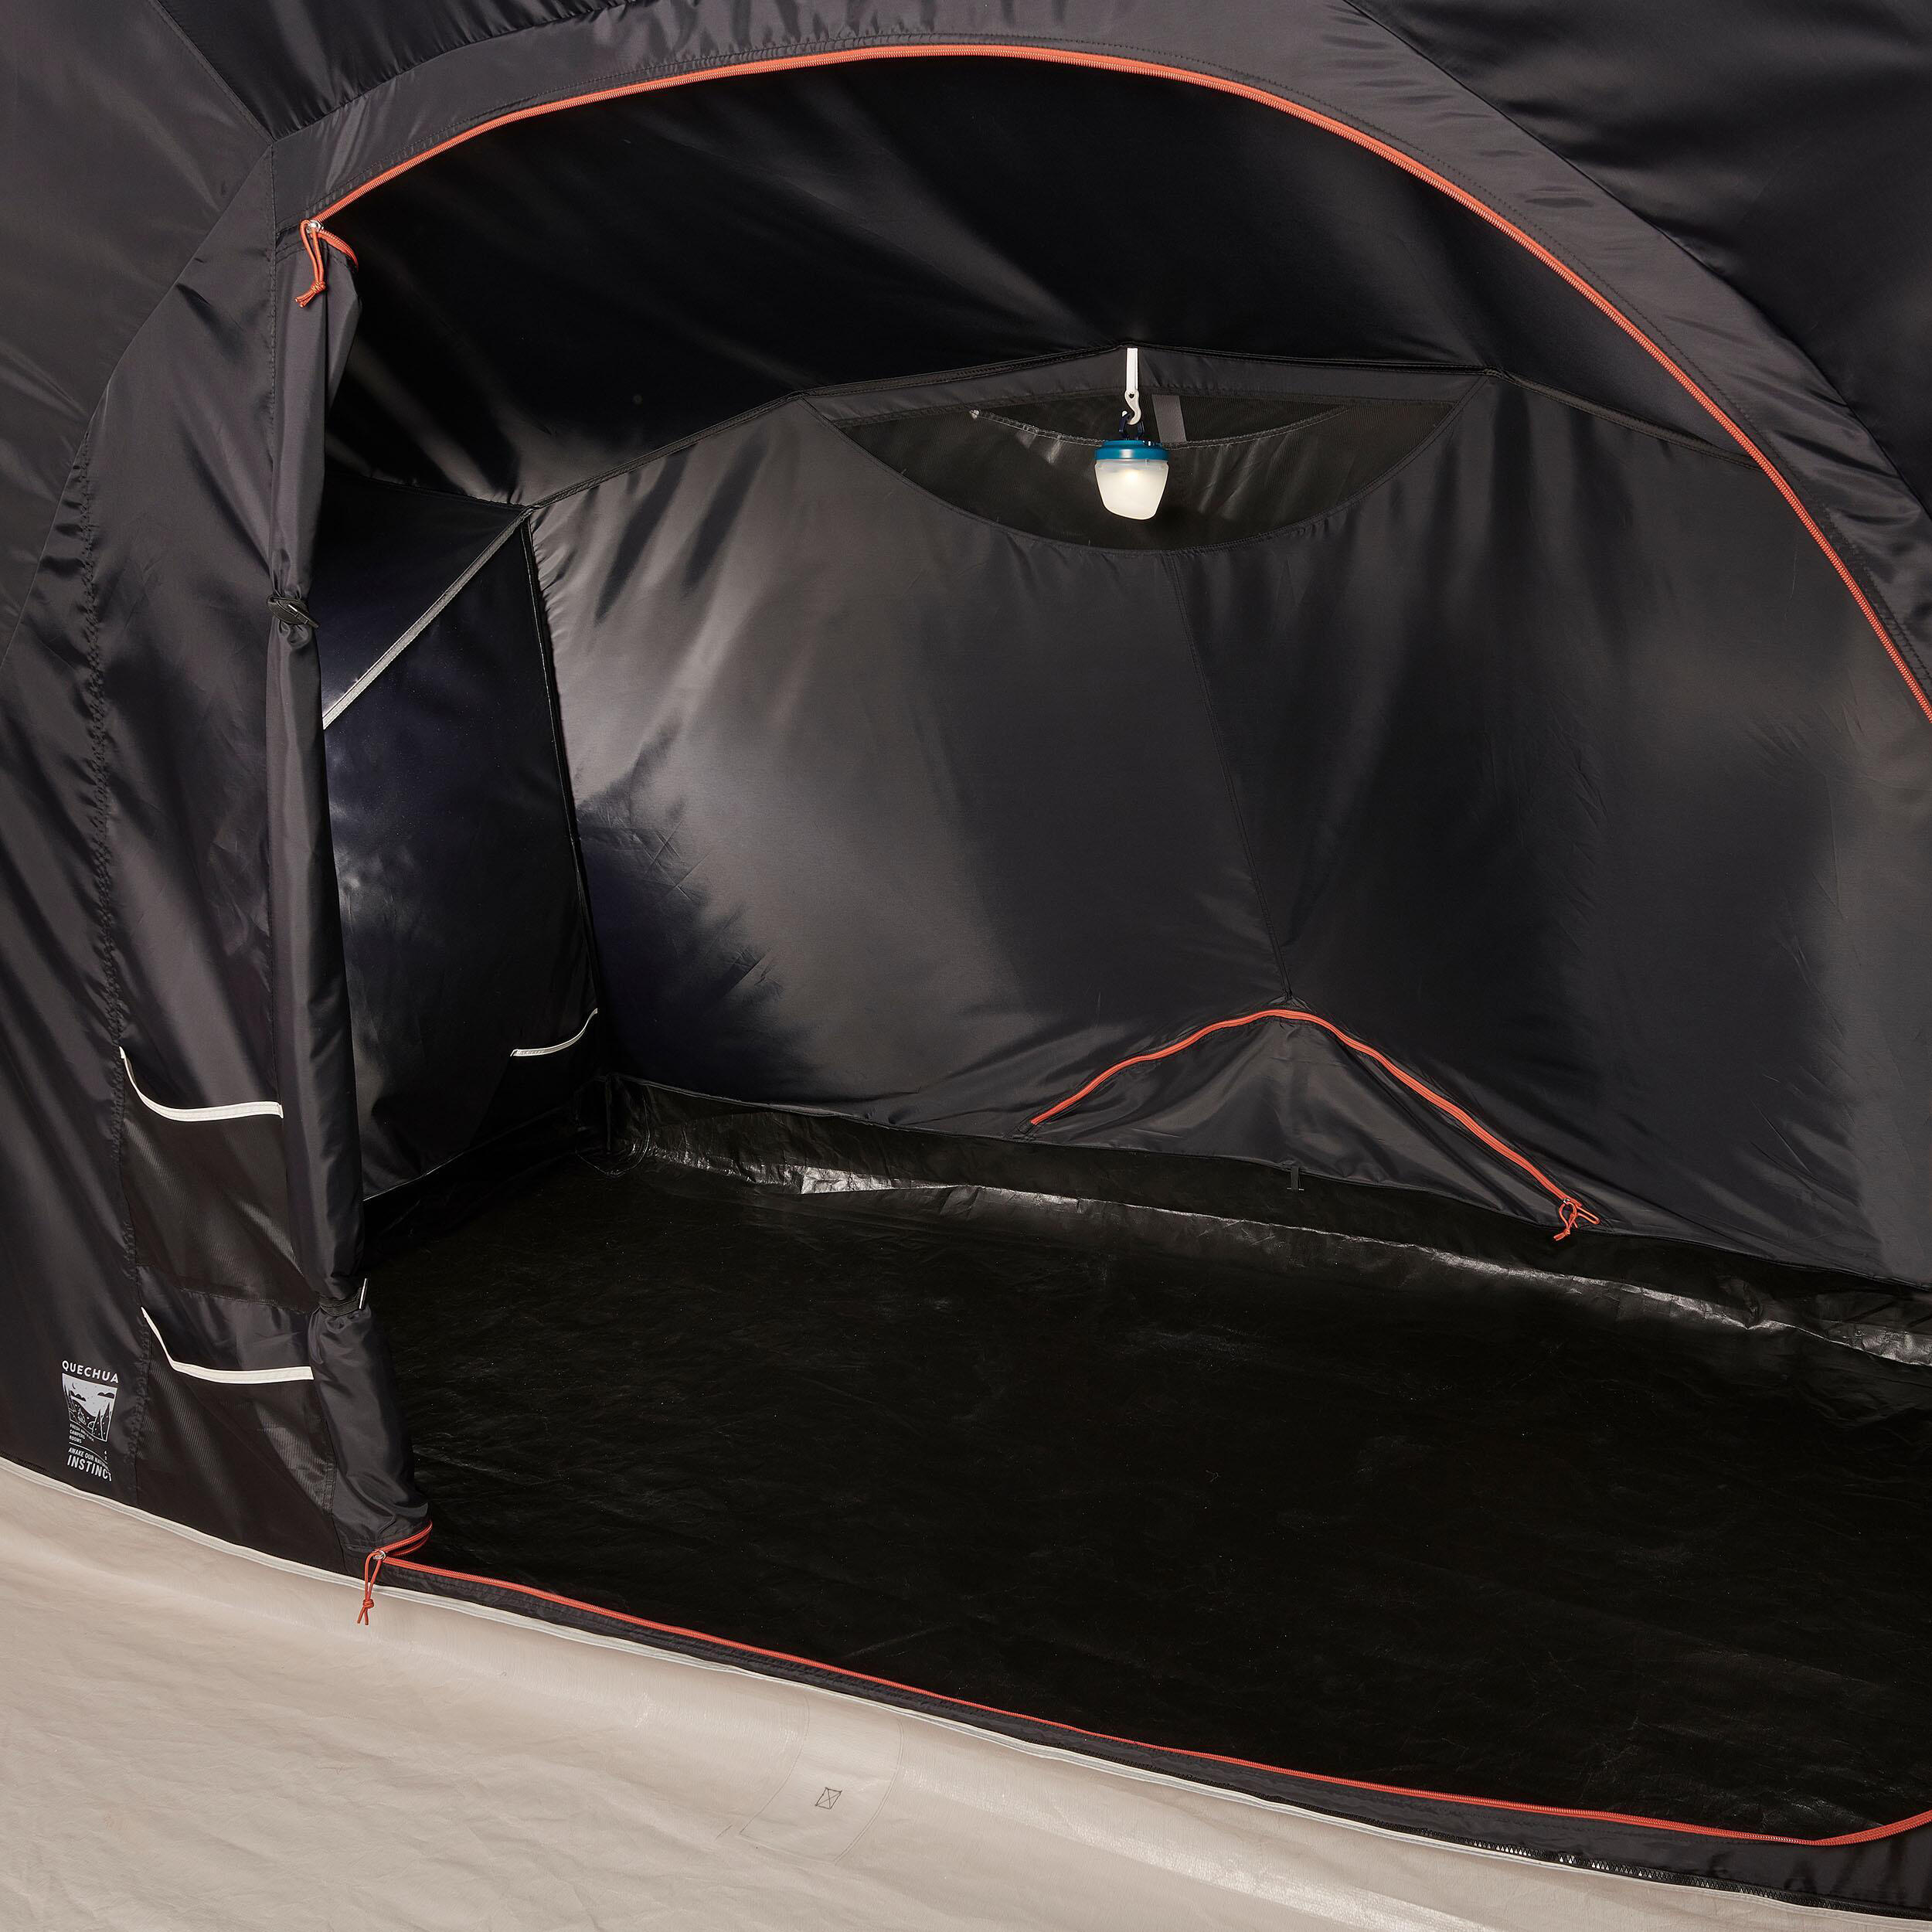 Quechua Bedroom - Replacement Part For The Air Seconds 4.2 Fresh&black Tent